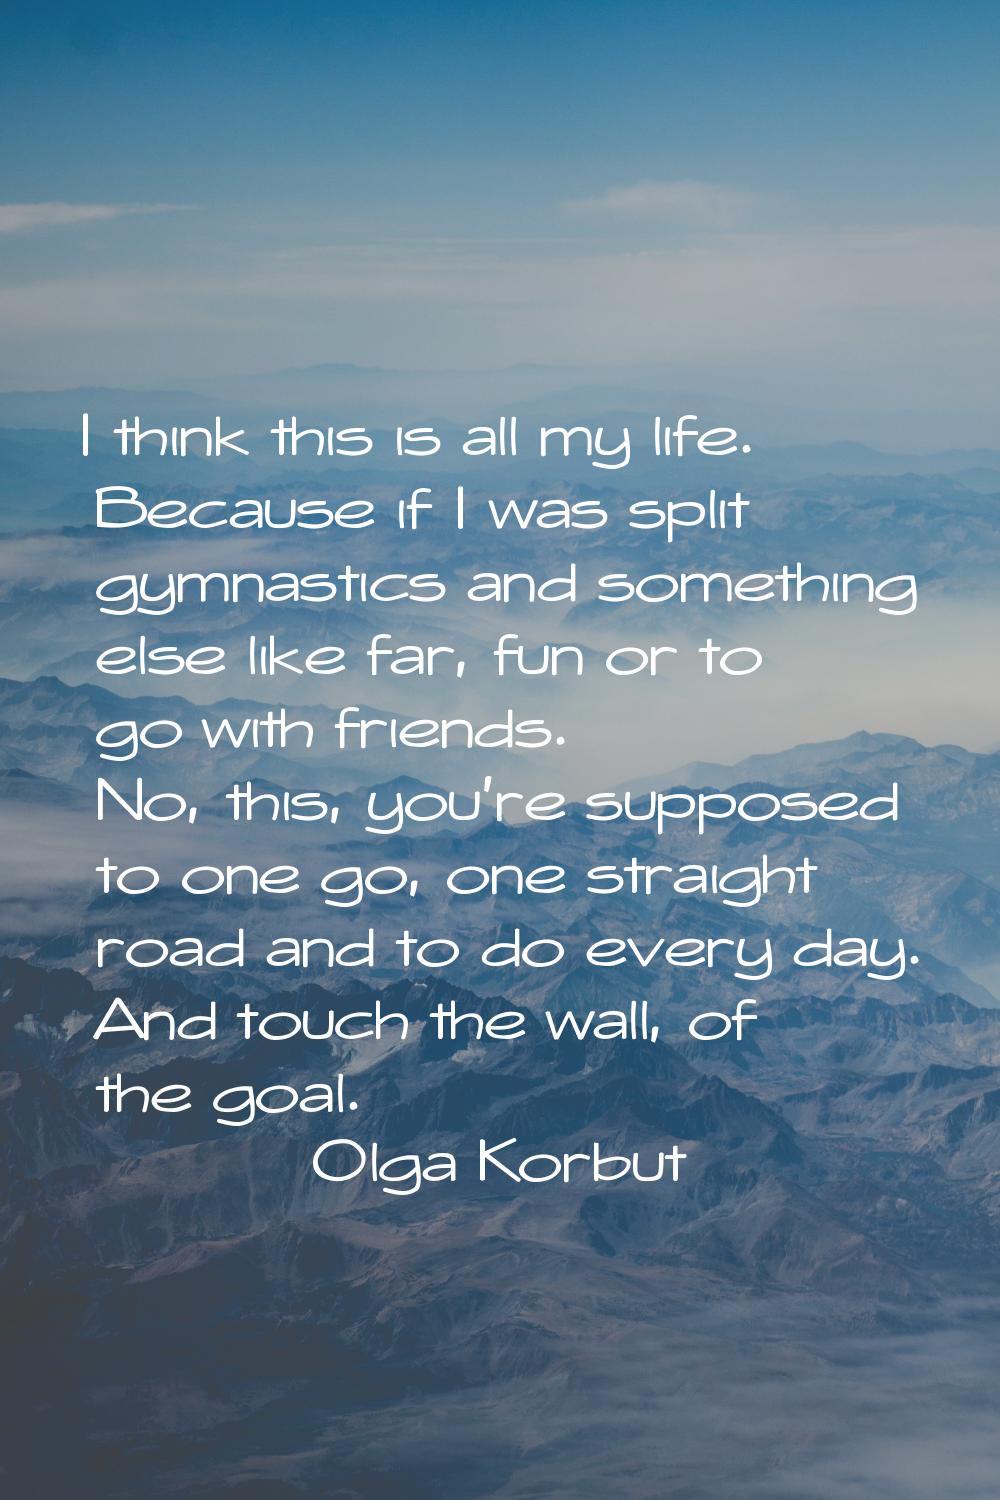 I think this is all my life. Because if I was split gymnastics and something else like far, fun or 